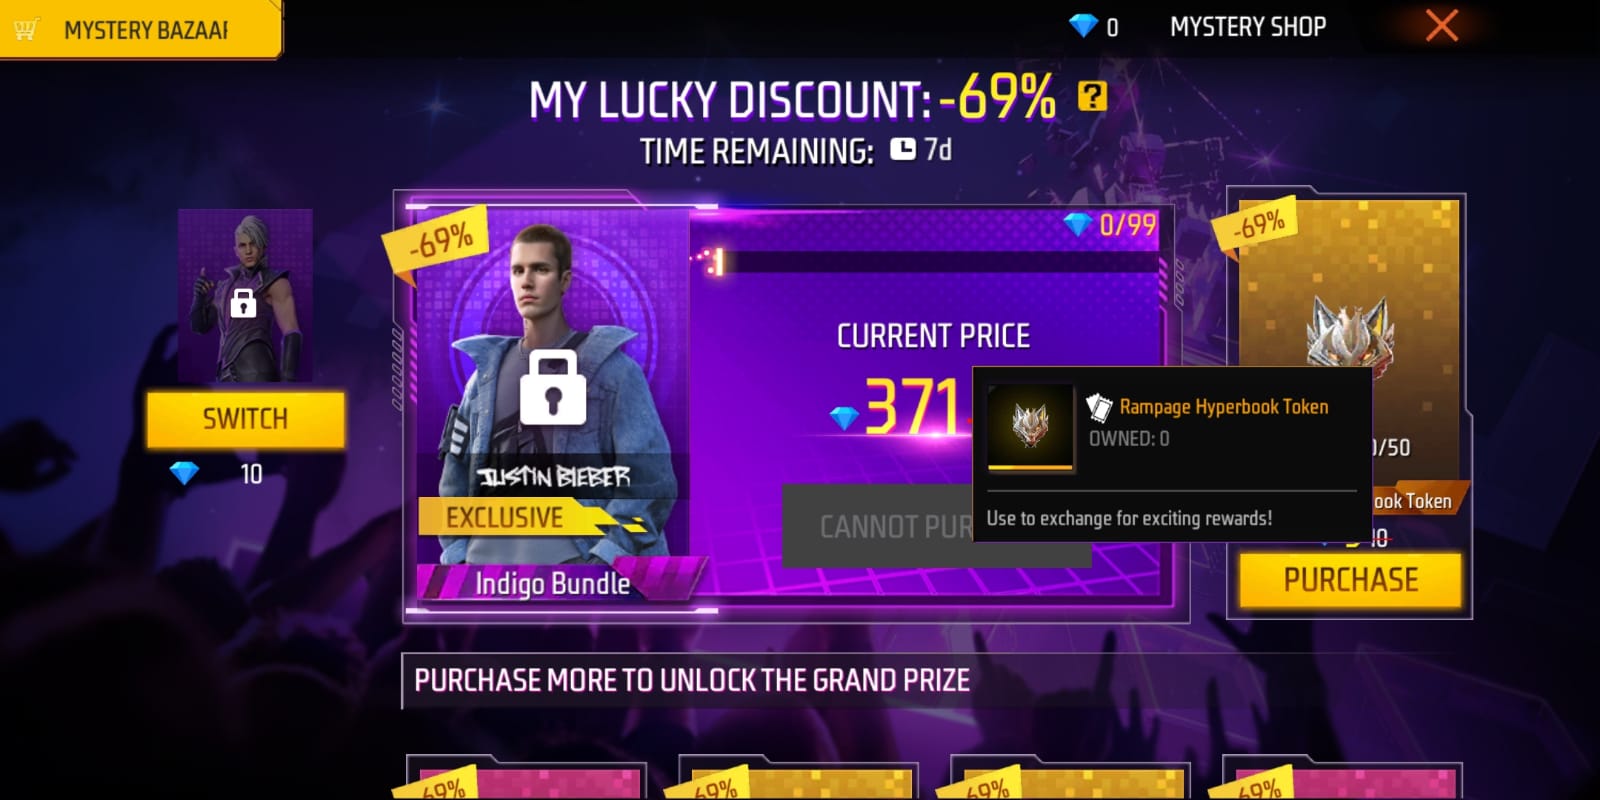 Free Fire MAX Mystery Shop Event: Get up to 90% off all items, CHECK DETAILS and everything you need to know about the event and rewards.  Read more here